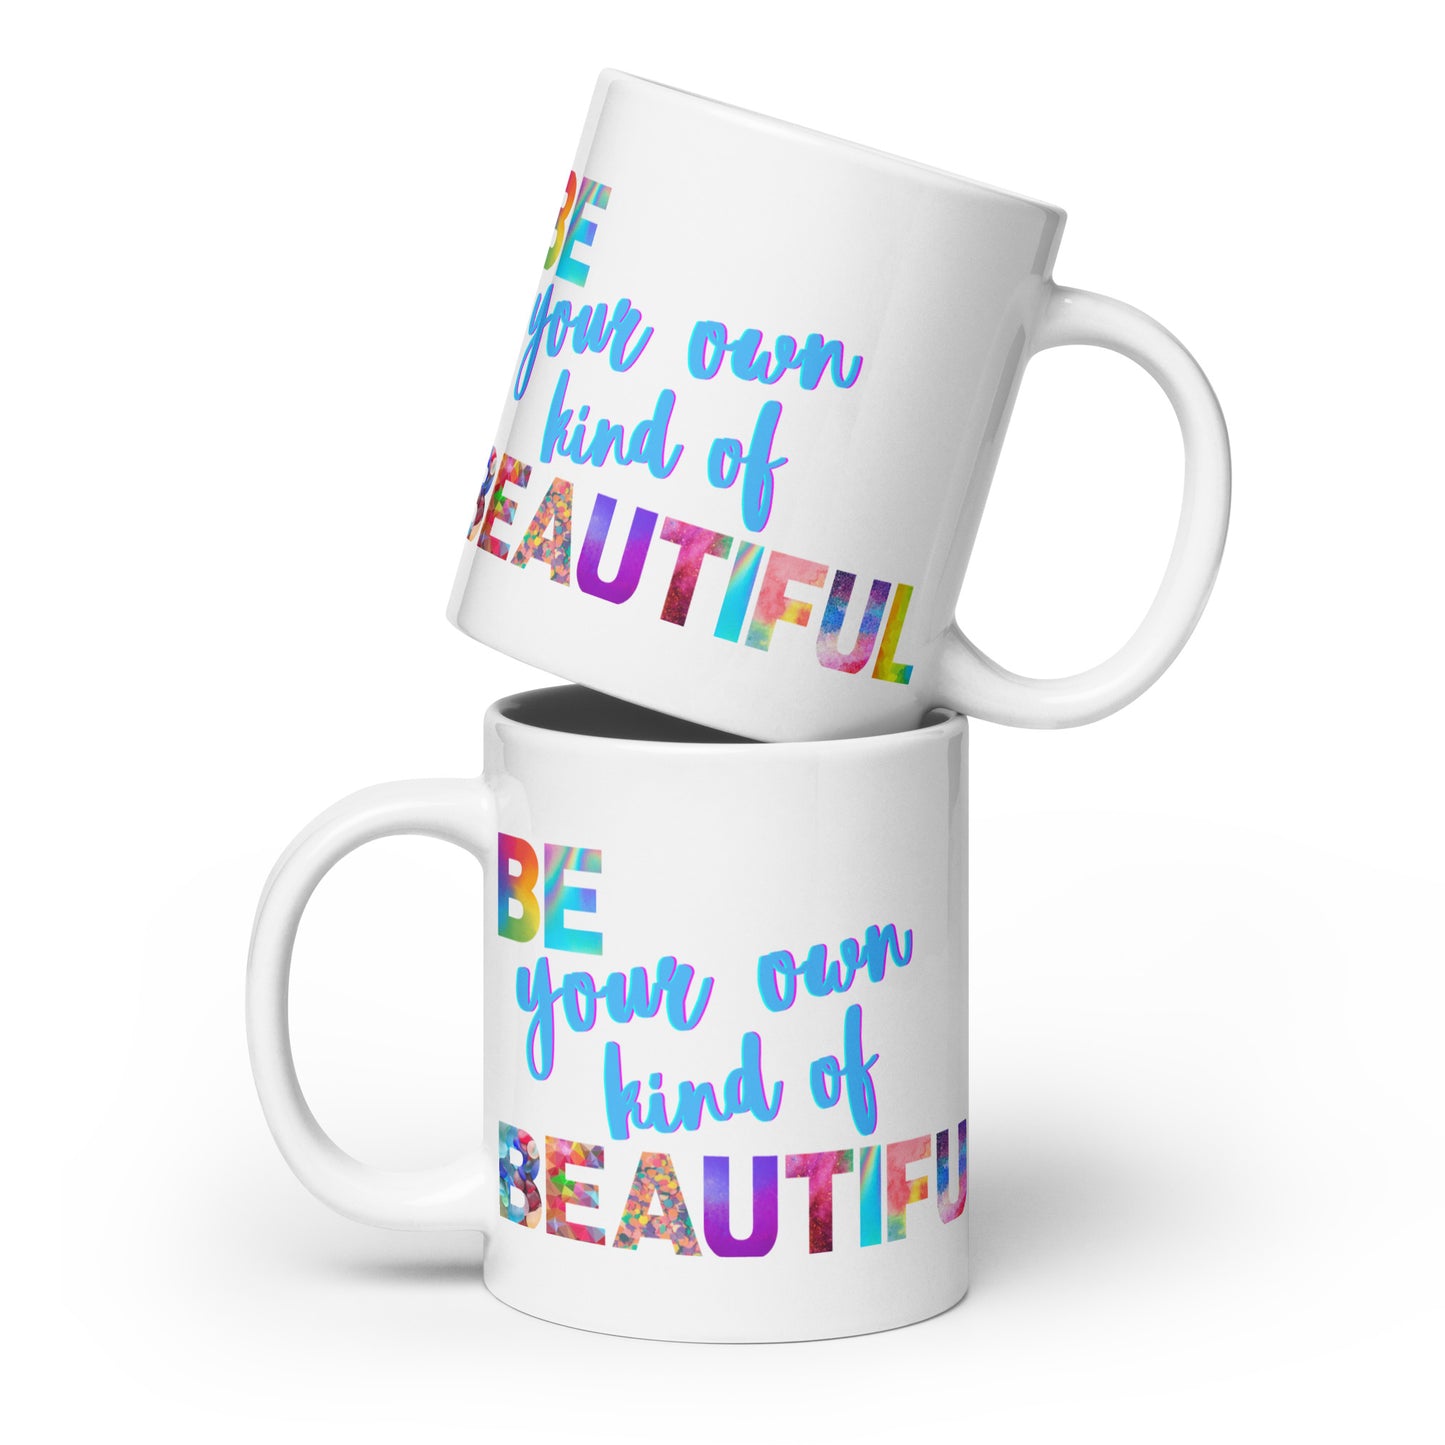 White Glossy Mug - Be Your Own Kind of Beautiful 2